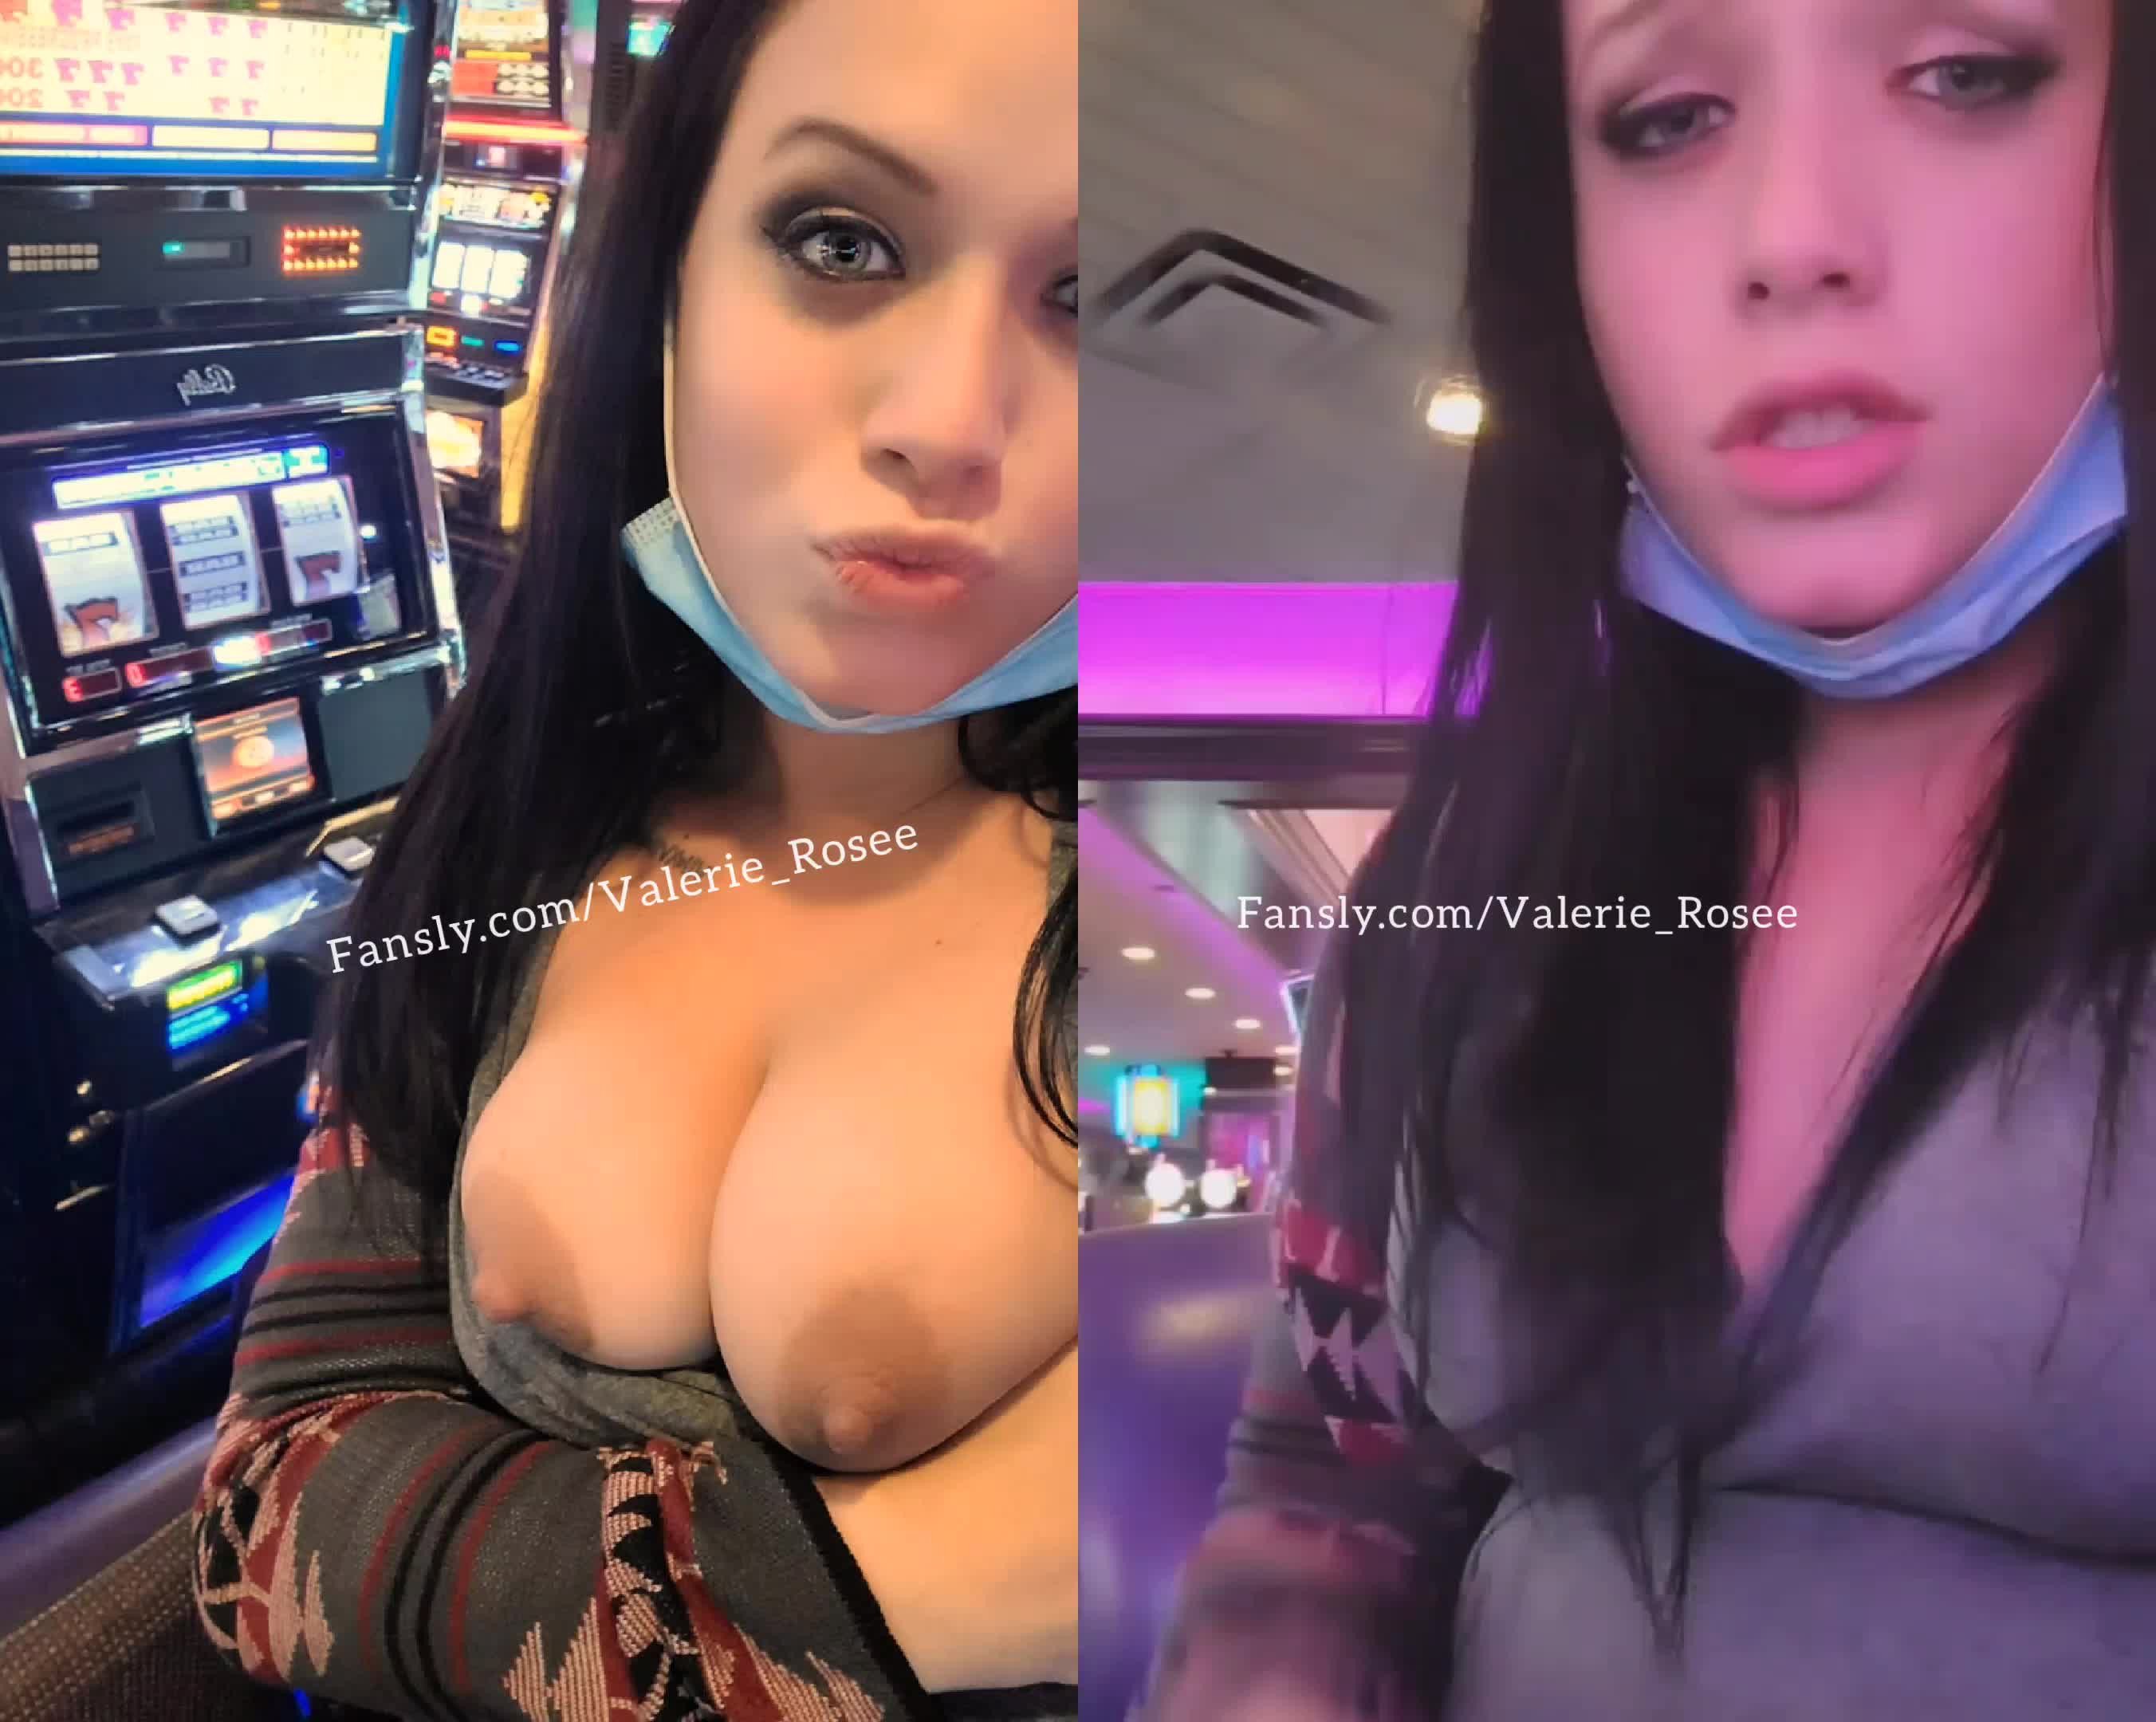 Video post by Valerie Rosee